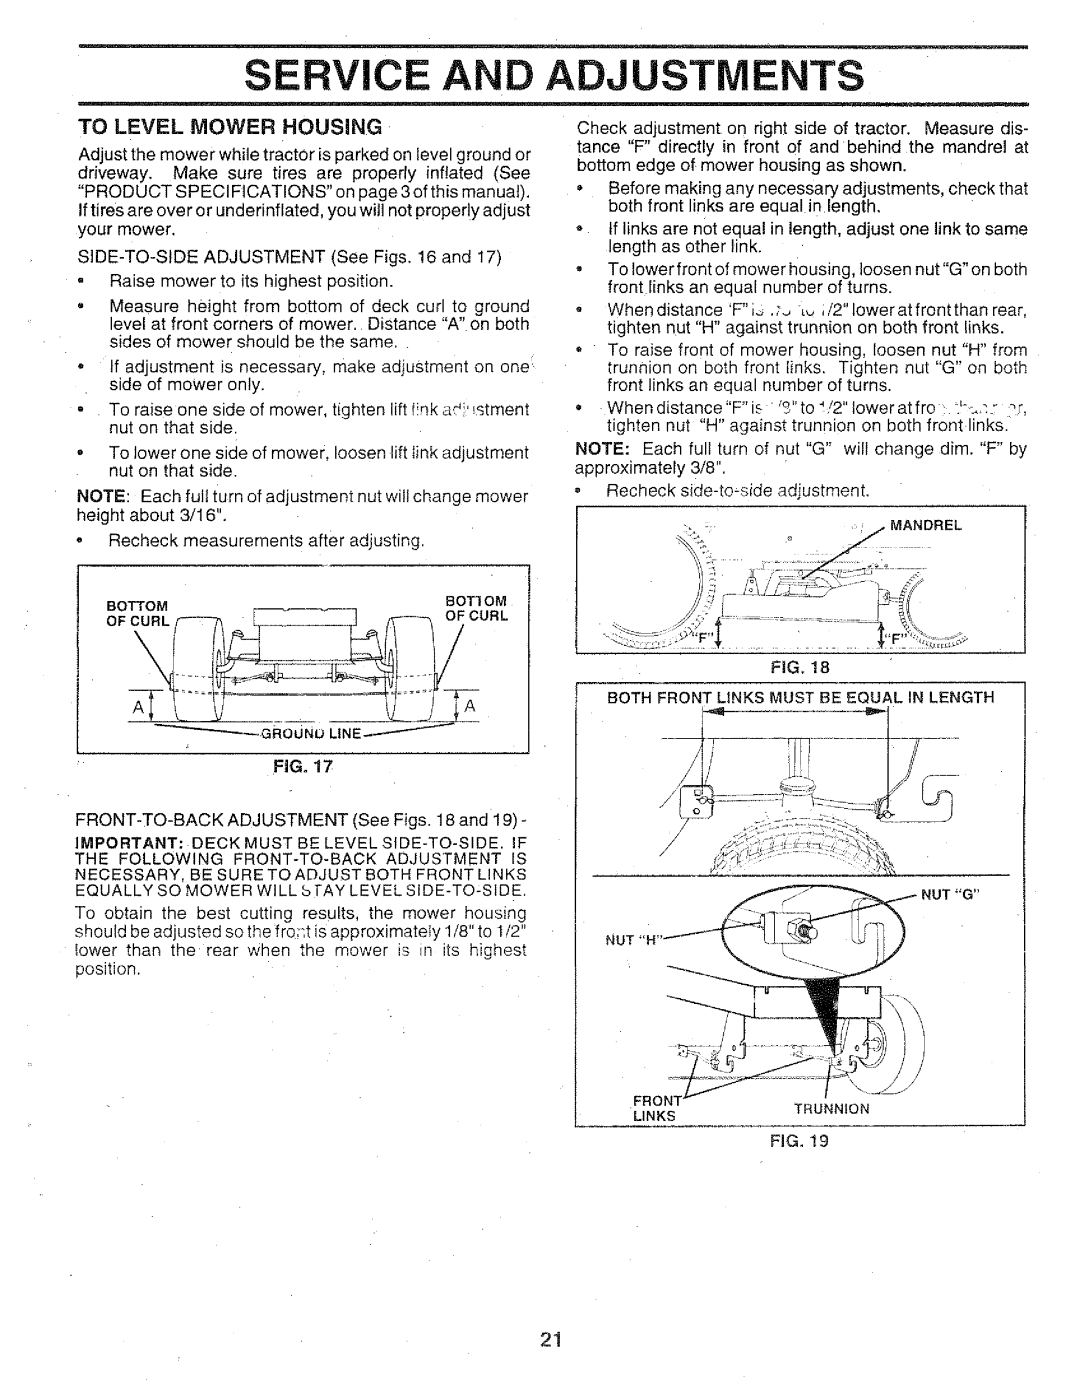 Sears 917.25147 owner manual Service And Adjustments, To Level Mower Housing 